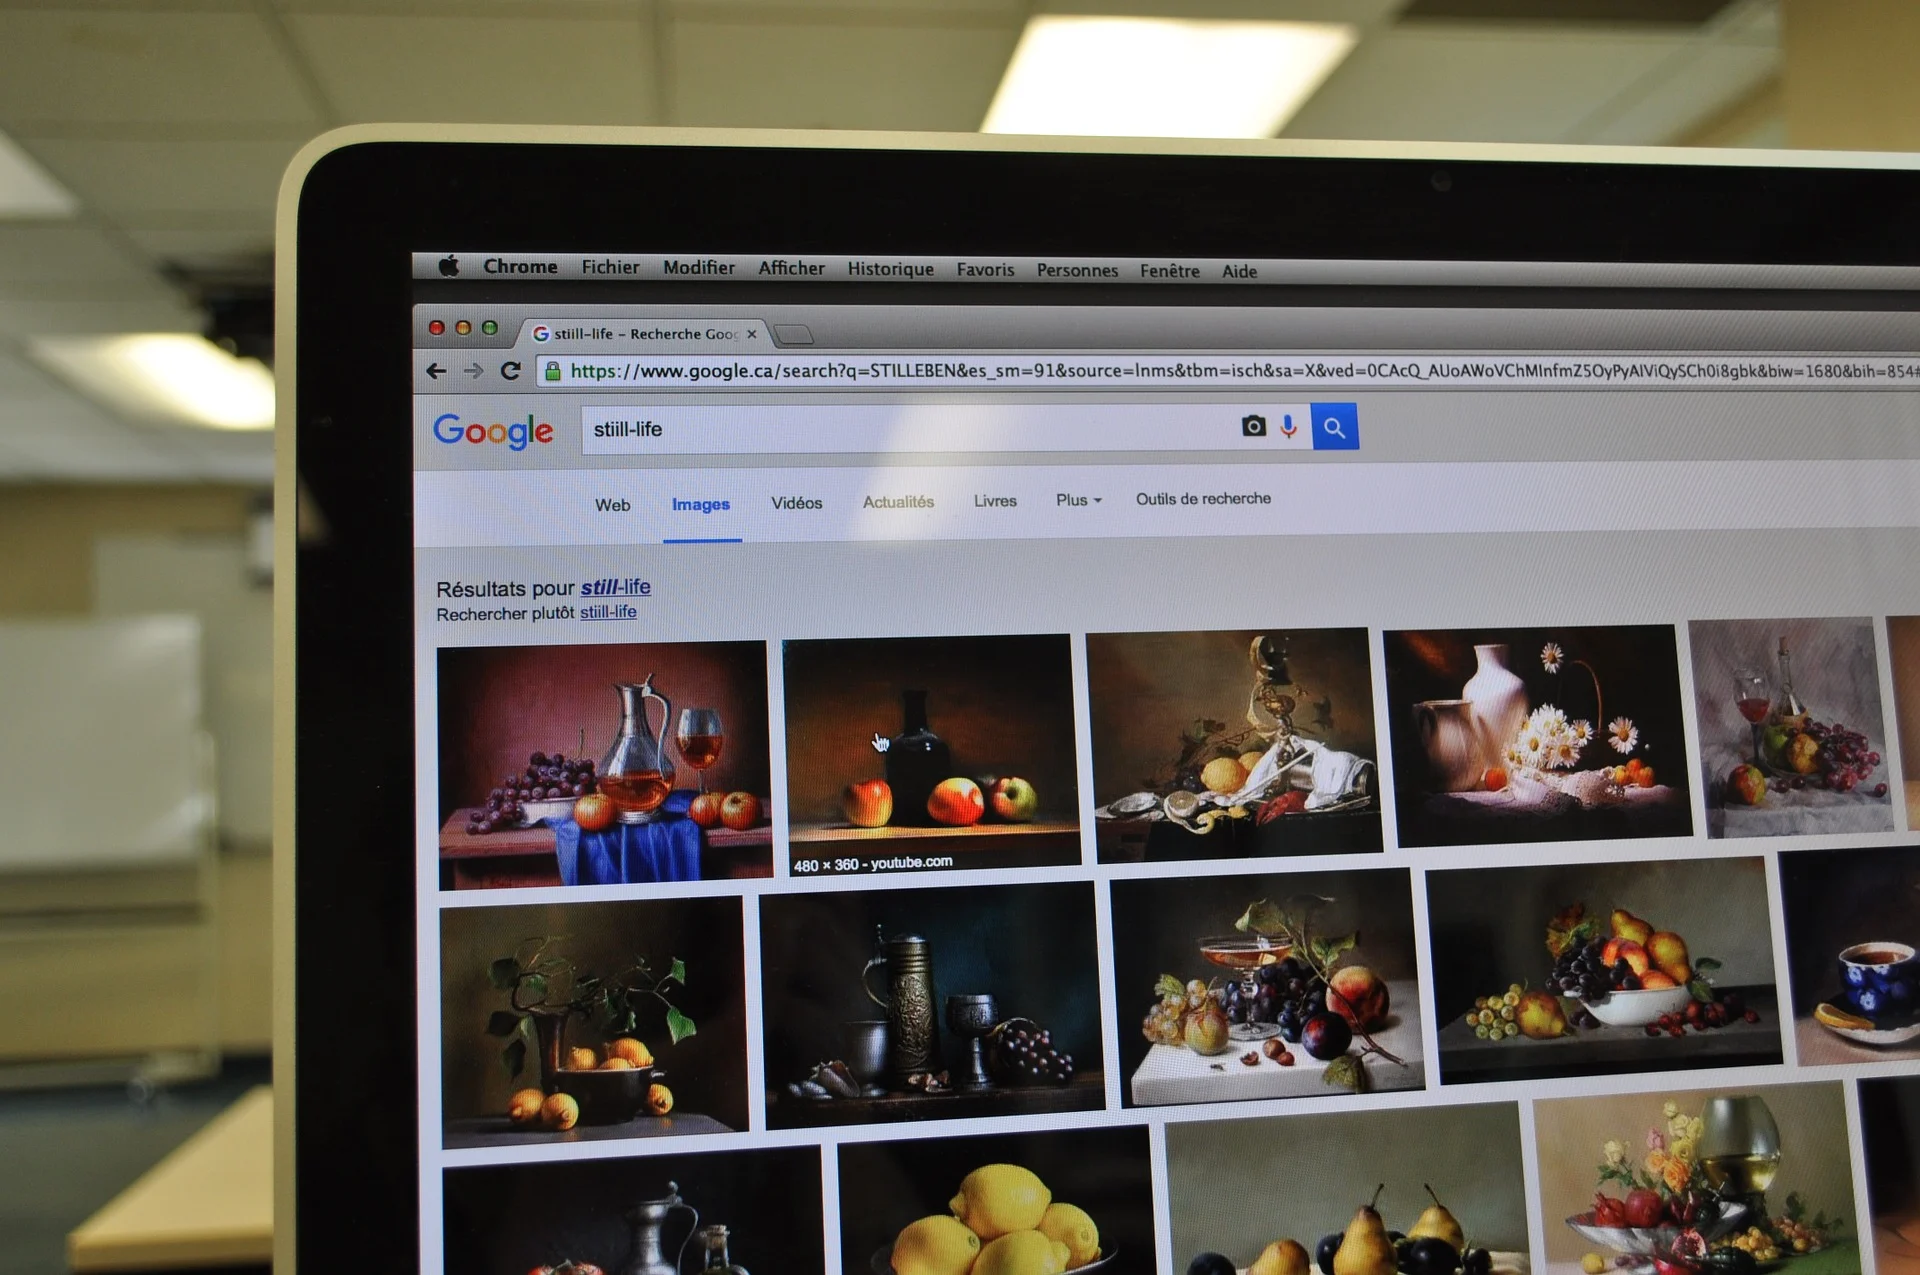 How to find similar photos with image search